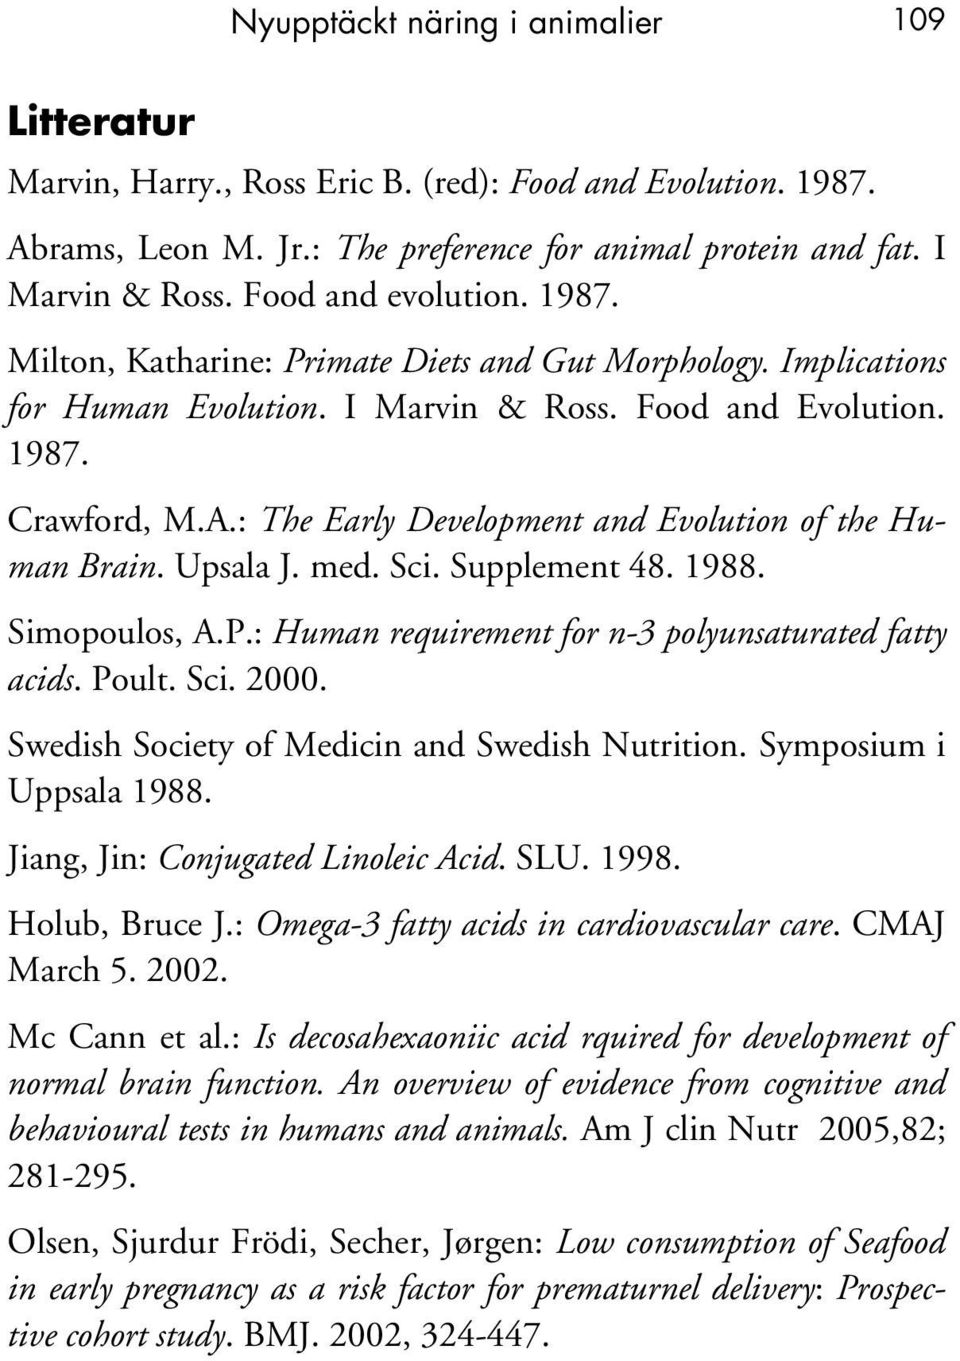 : The Early Development and Evolution of the Human Brain. Upsala J. med. Sci. Supplement 48. 1988. Simopoulos, A.P.: Human requirement for n-3 polyunsaturated fatty acids. Poult. Sci. 2000.